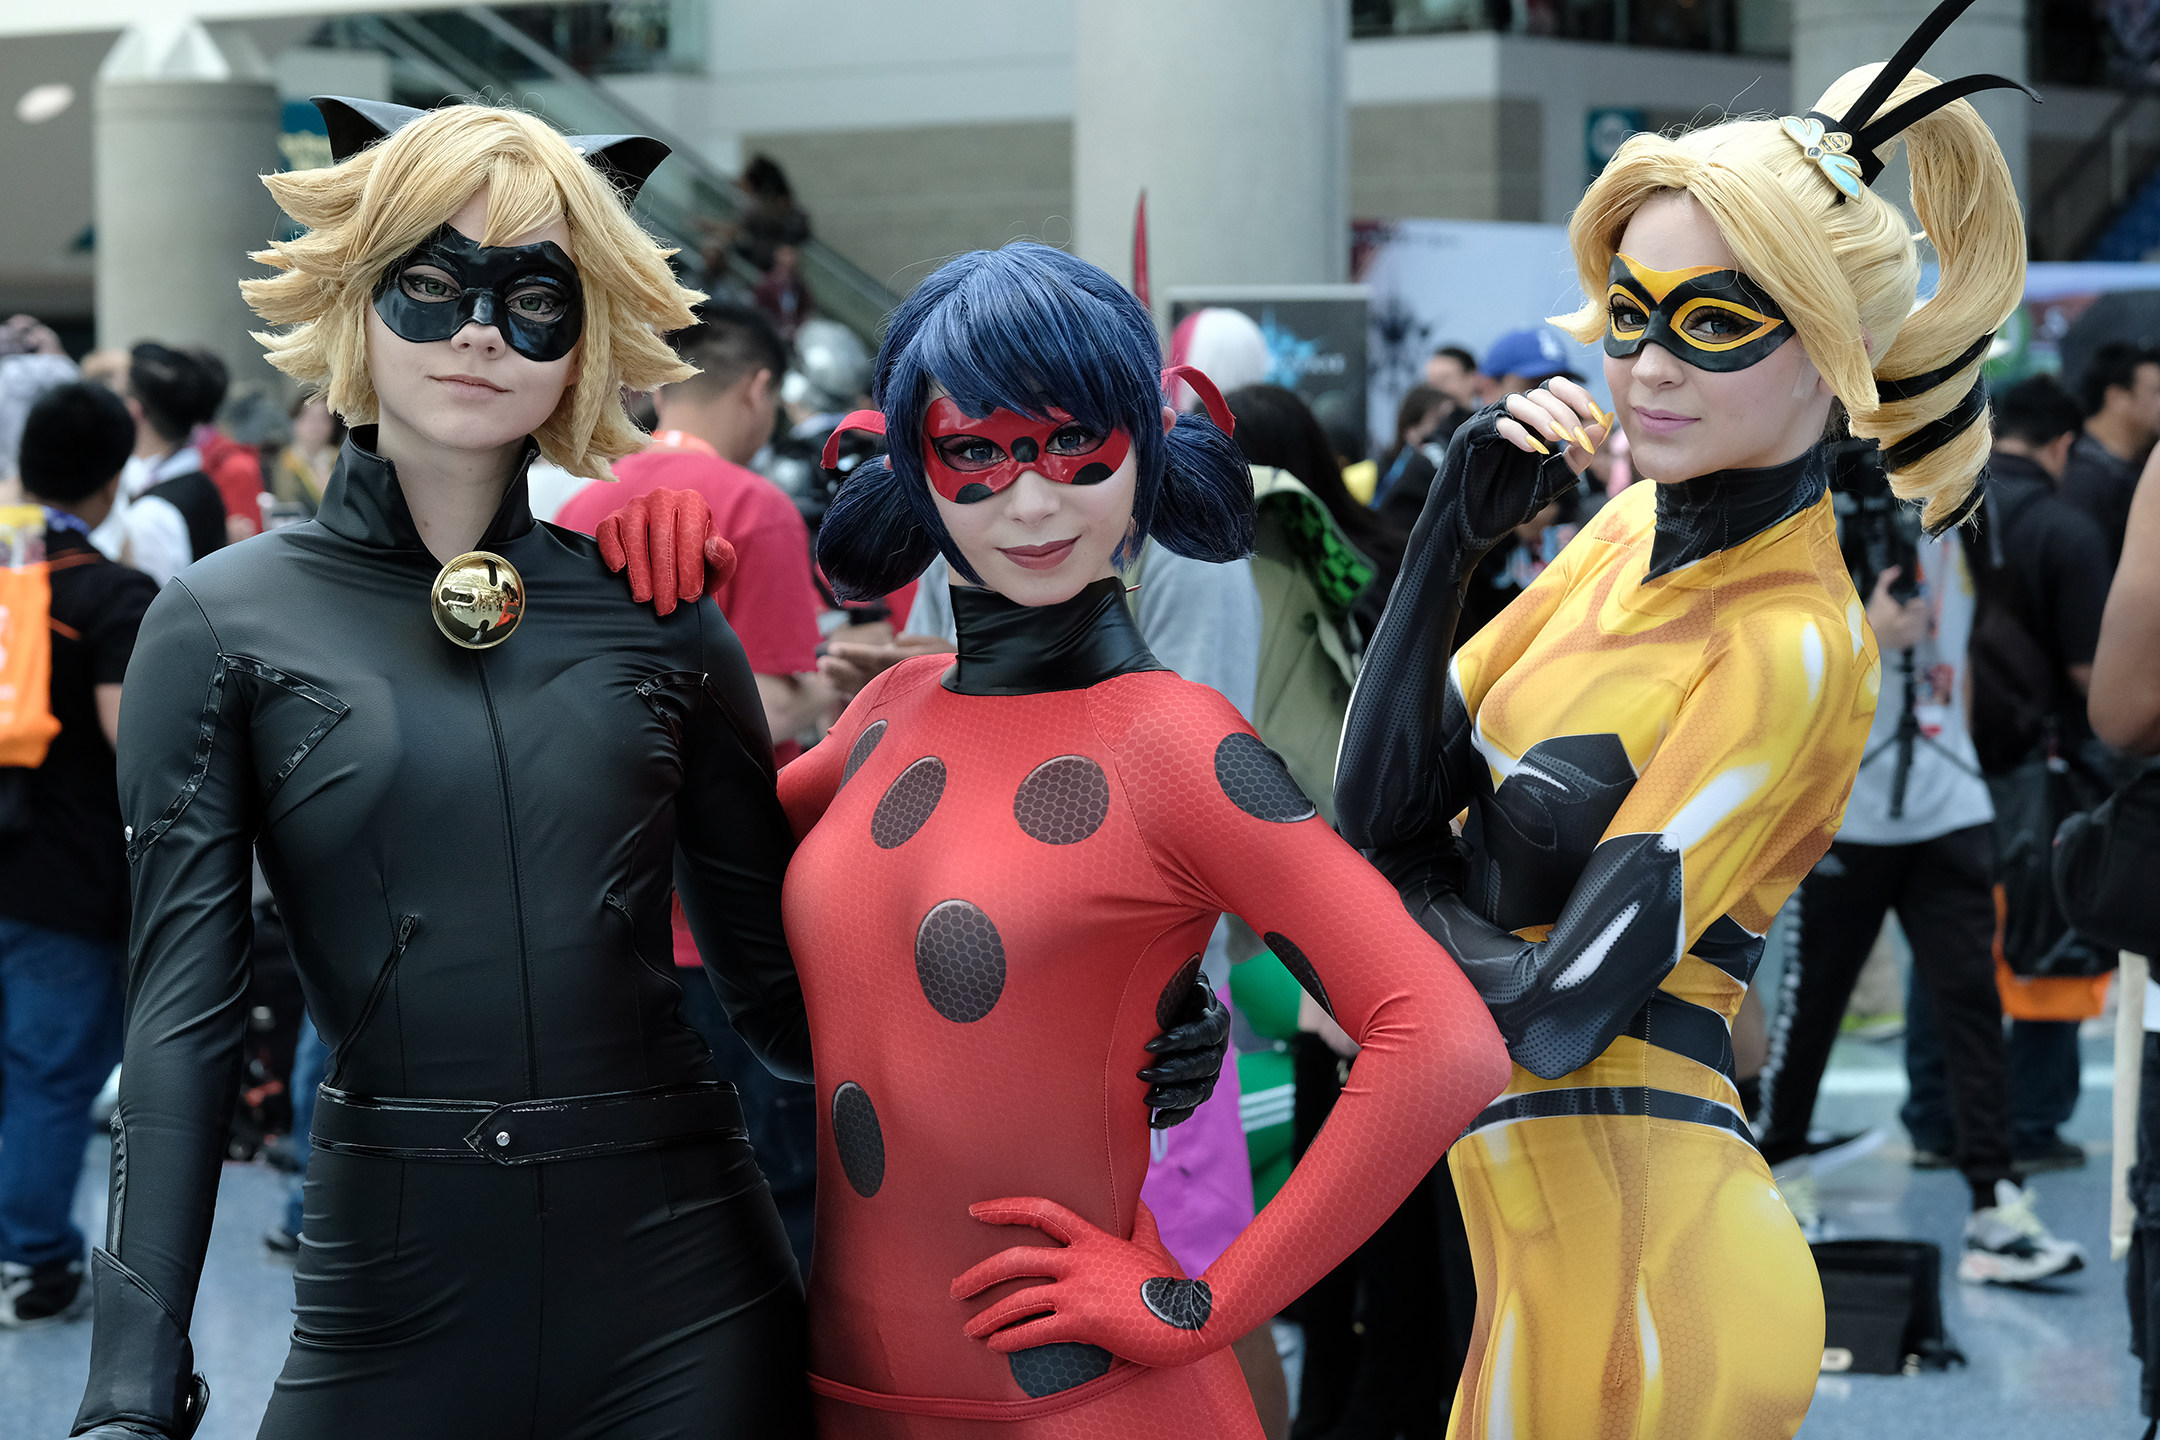 Best anime cosplays at Anime Expo 2022, from Chainsaw Man to “Blue Eyes  White Drag Queen” - Dexerto